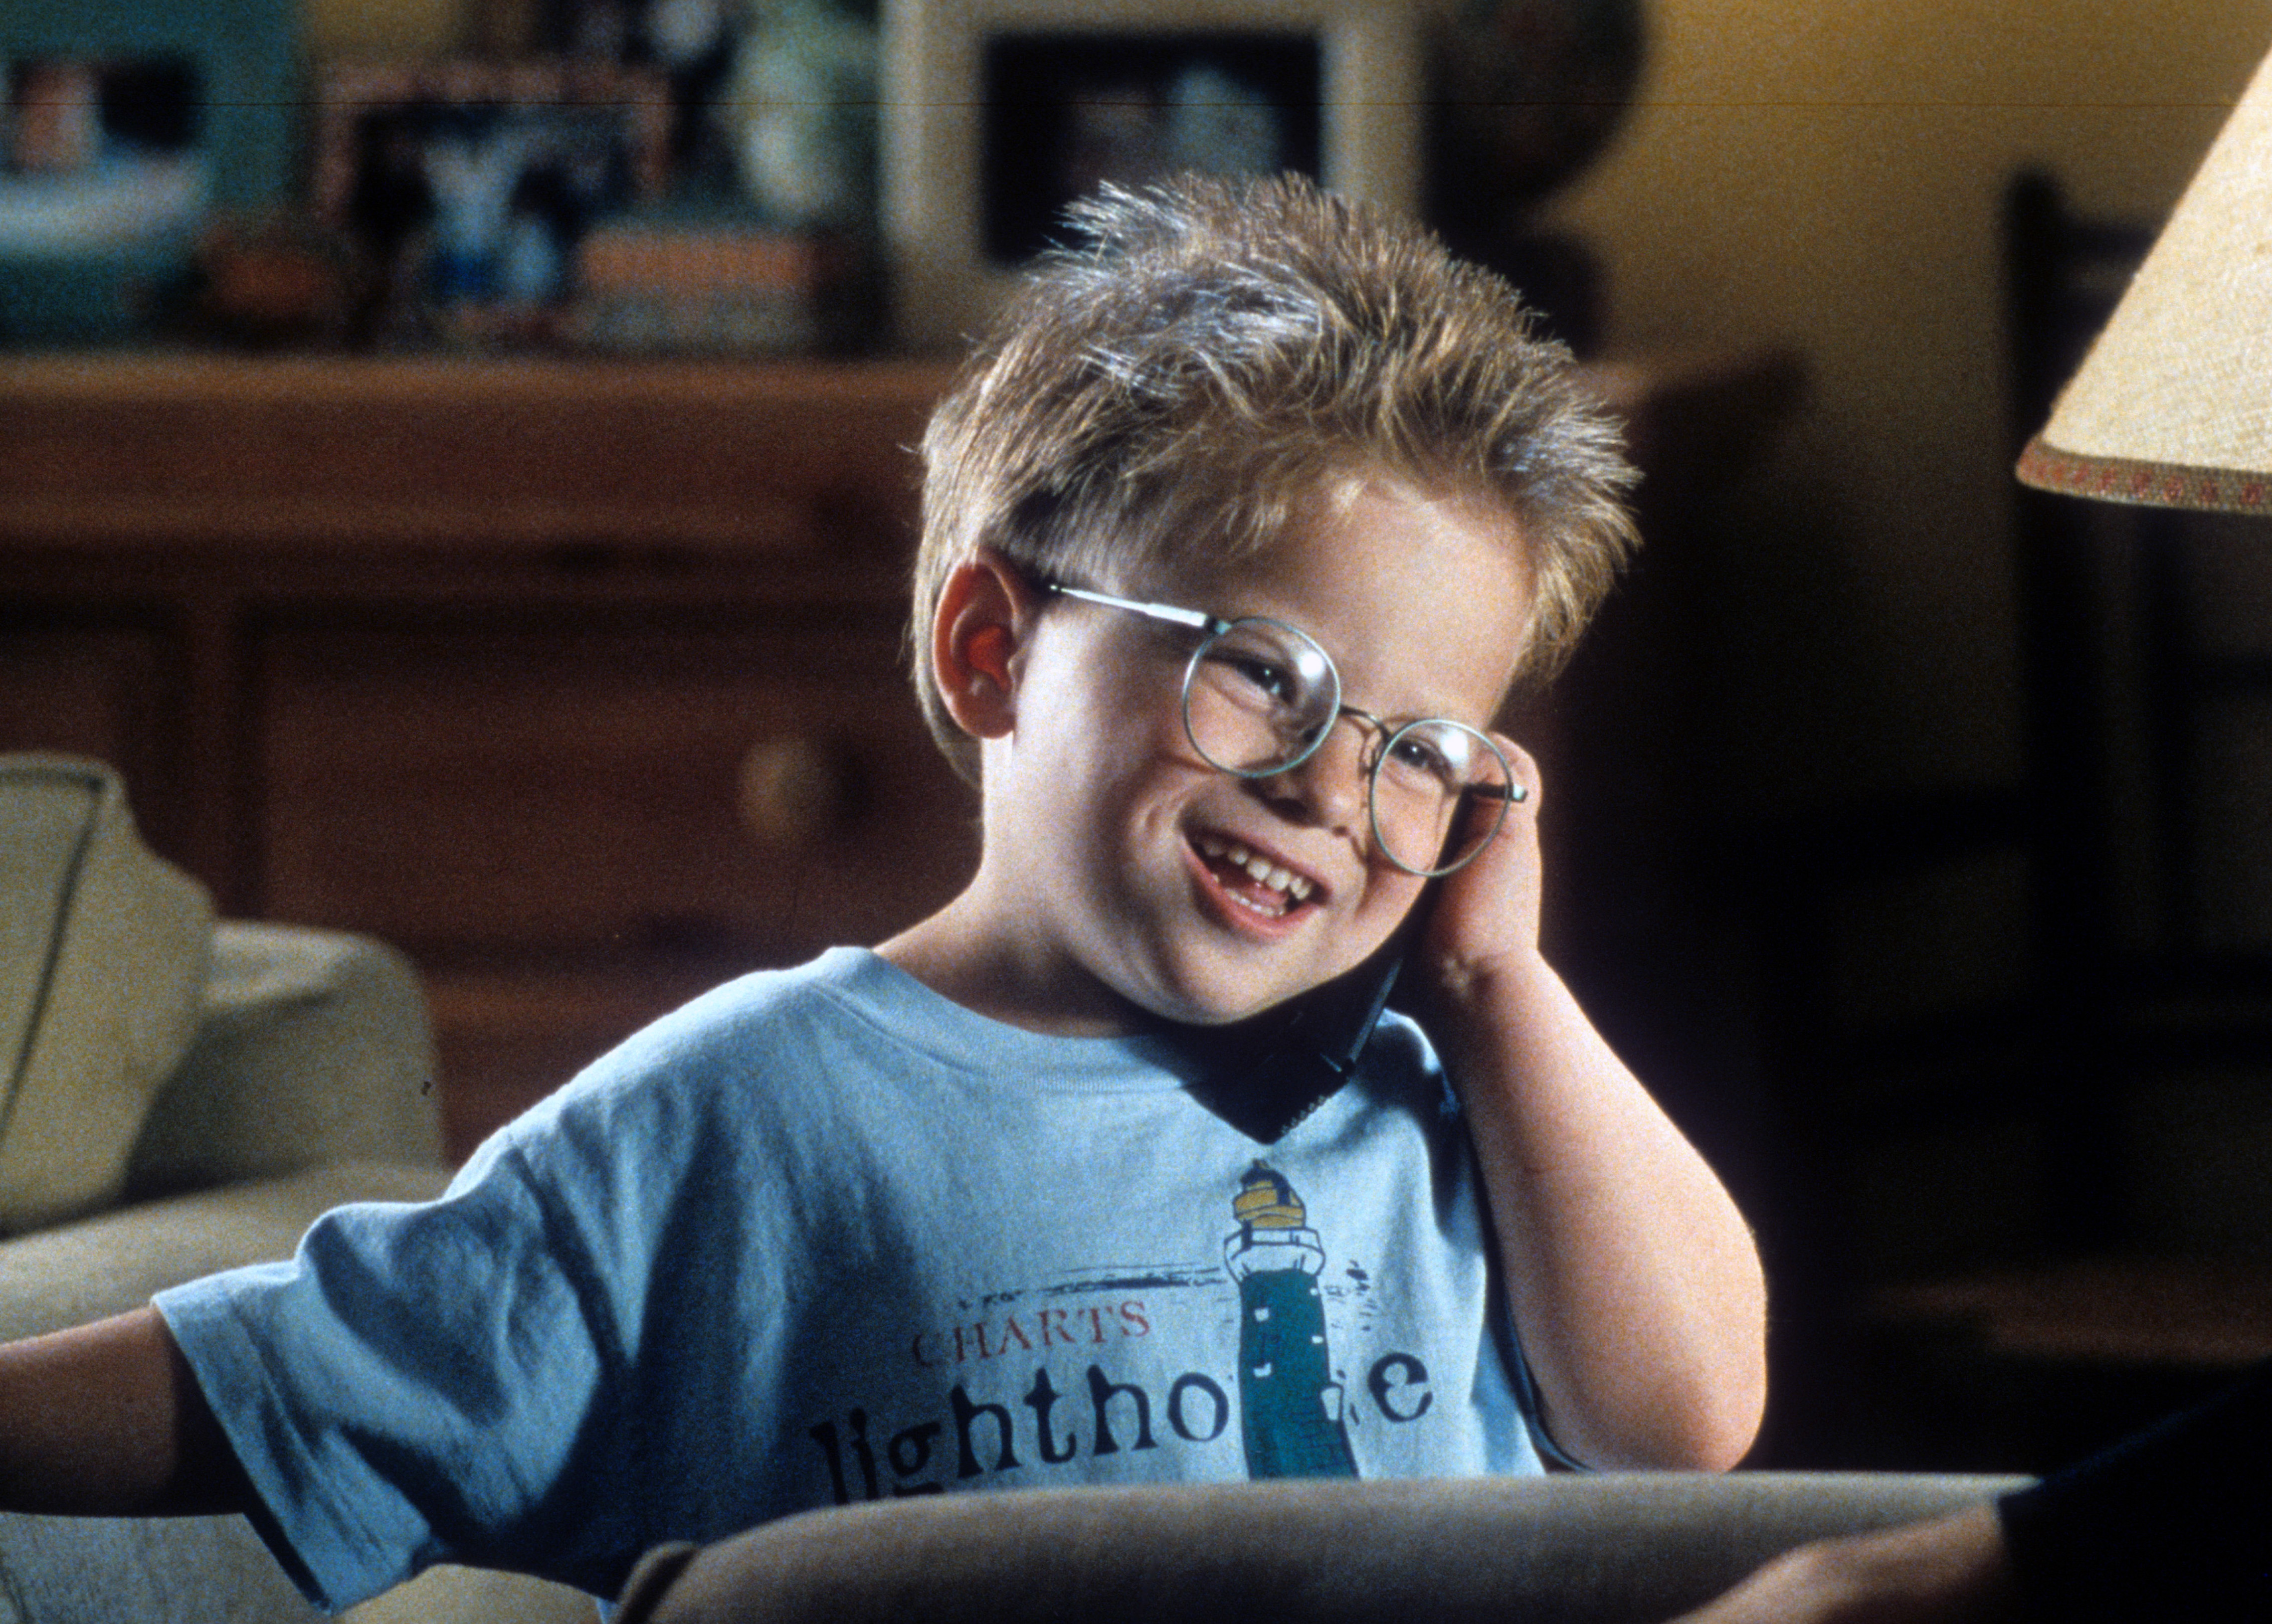 The child actor during a scene from "Jerry Maguire" in 1996 | Source: Getty Images